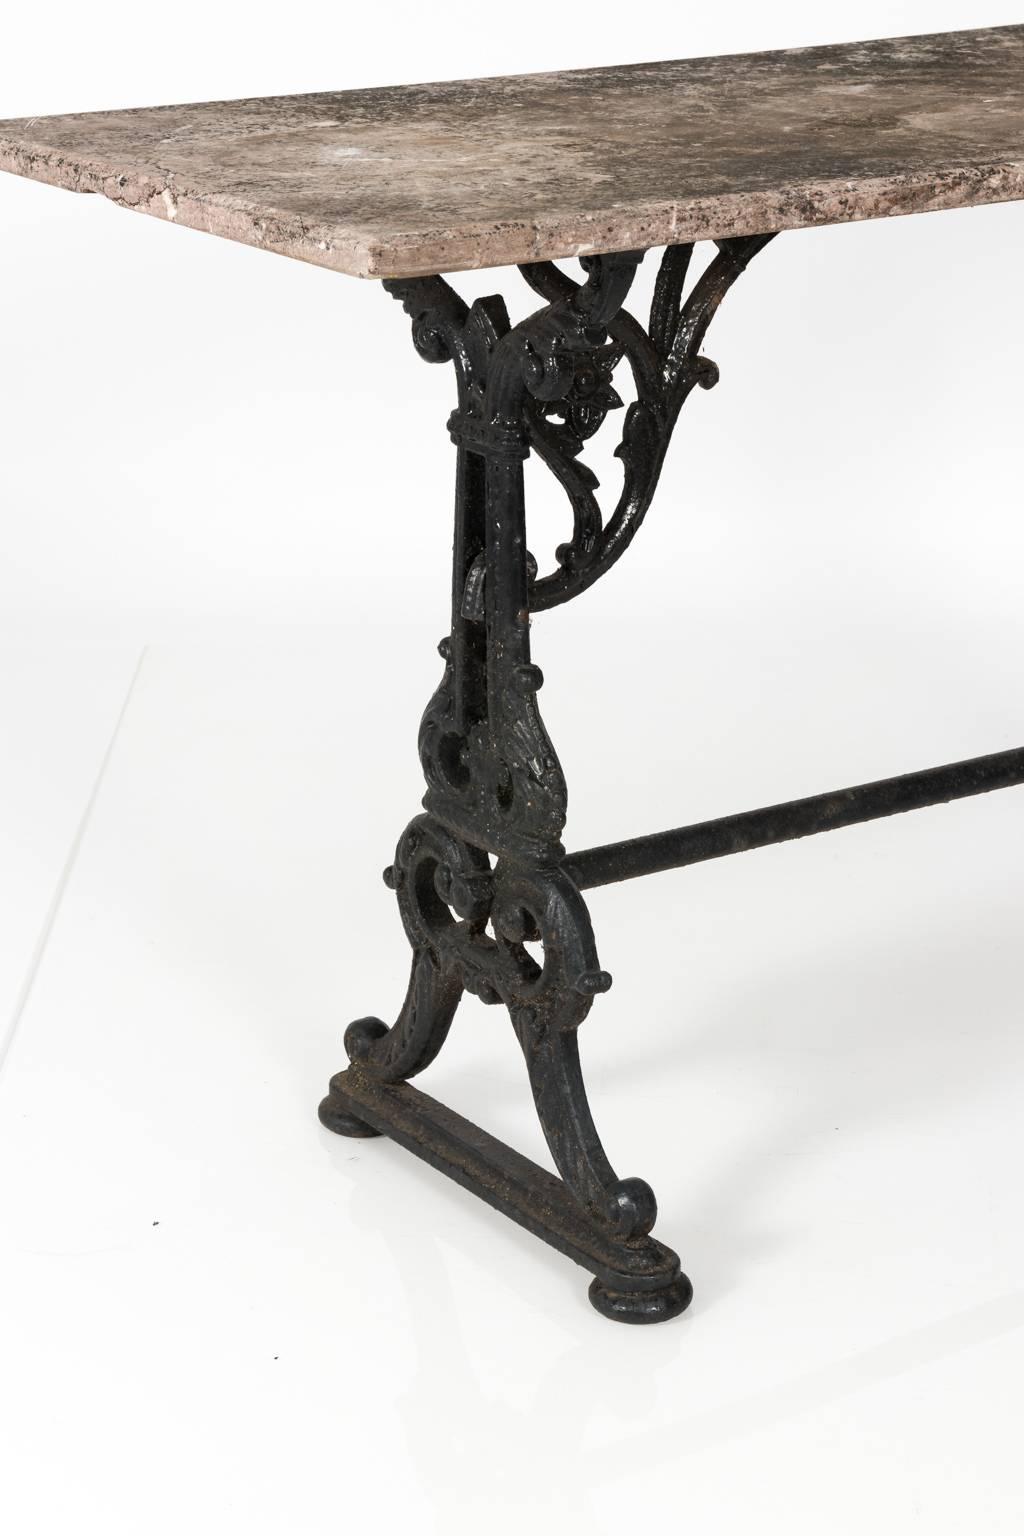 Late 19th century cast iron base baker's table featuring floral and scroll motif with a stretcher. Marble has unfinished rough finish with patina due to the process of oxidation.